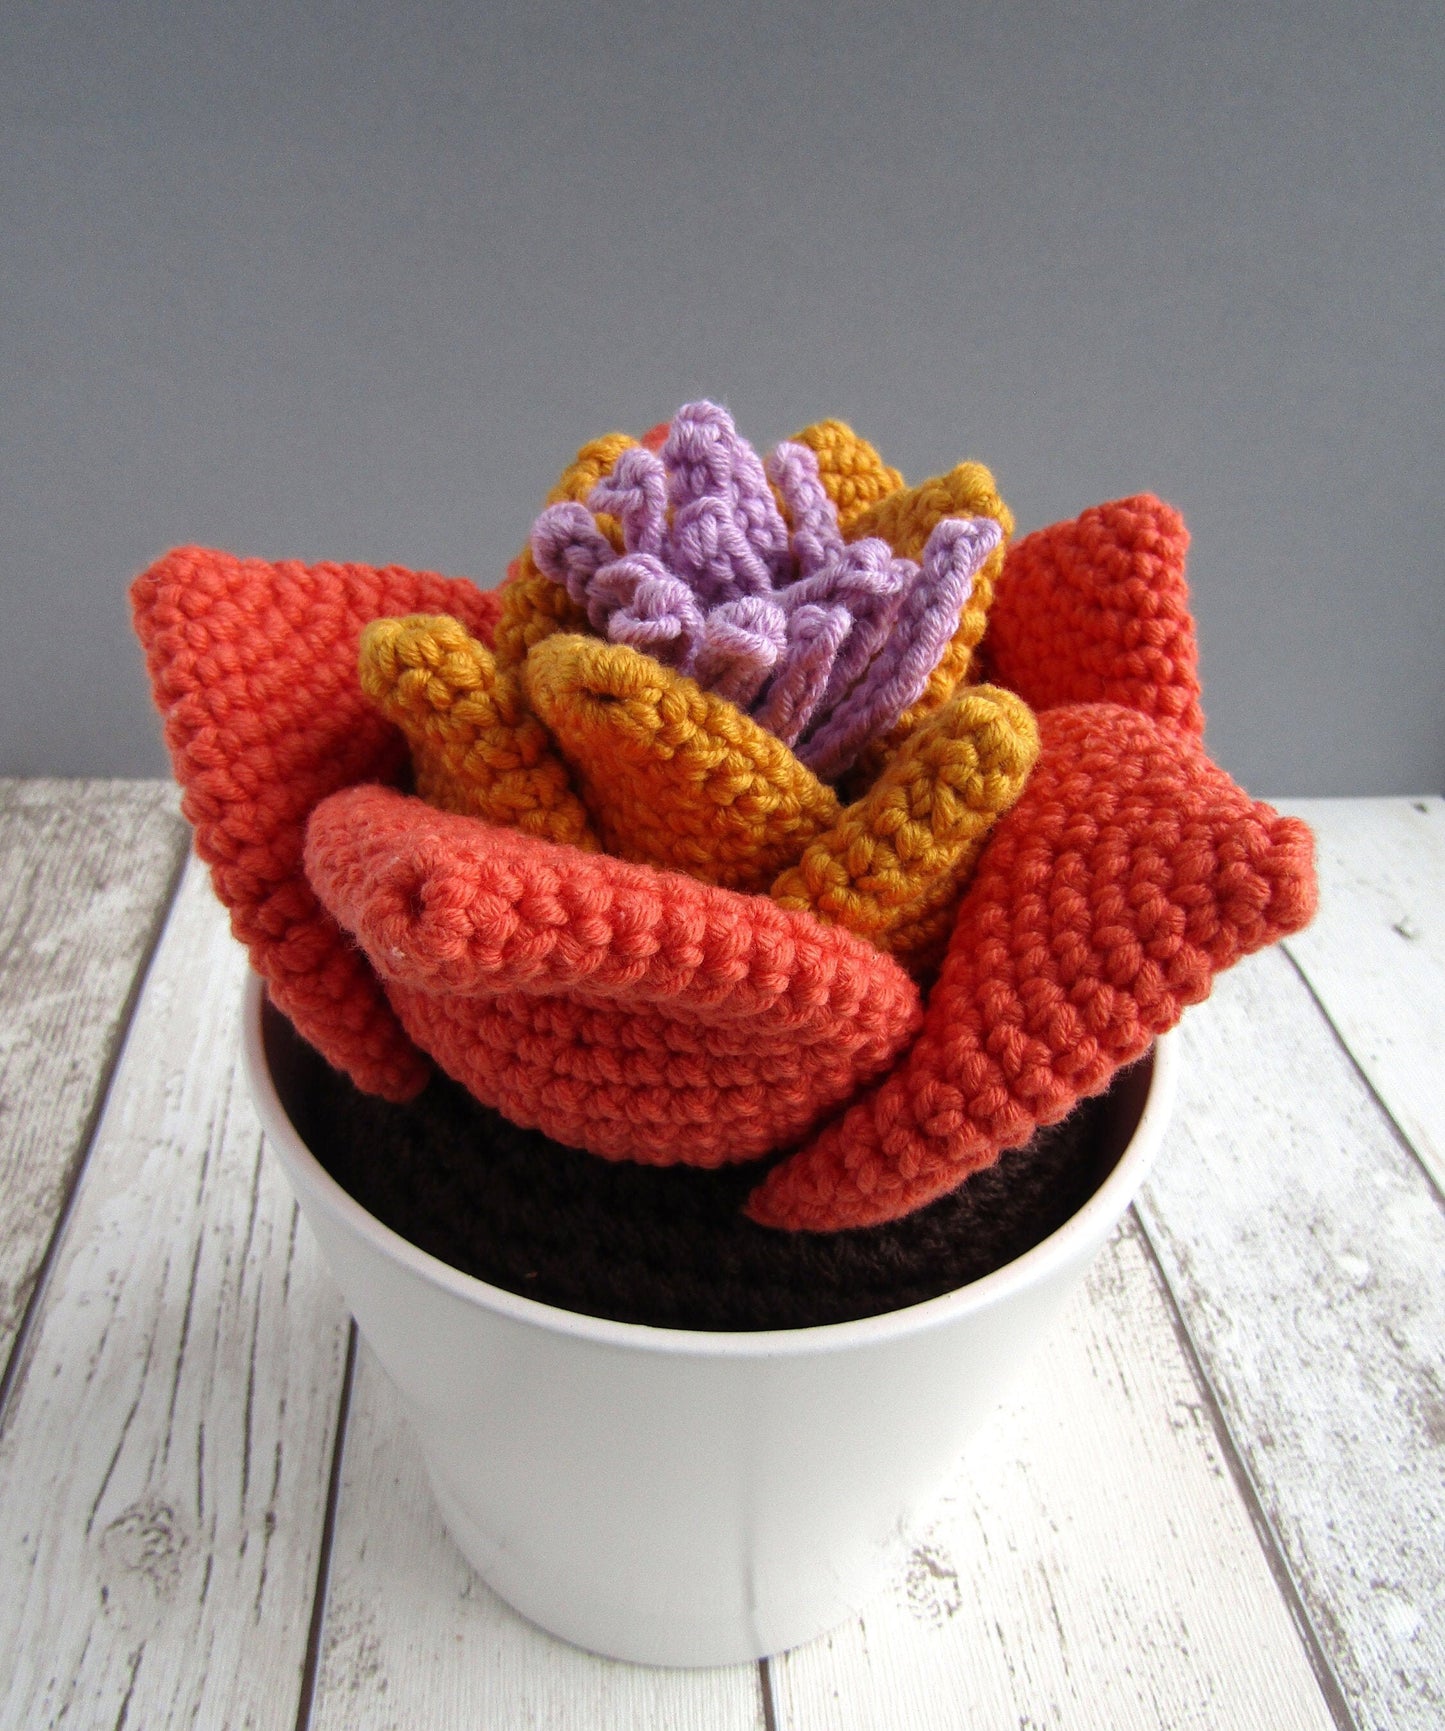 Crocheted succulent plant with pot